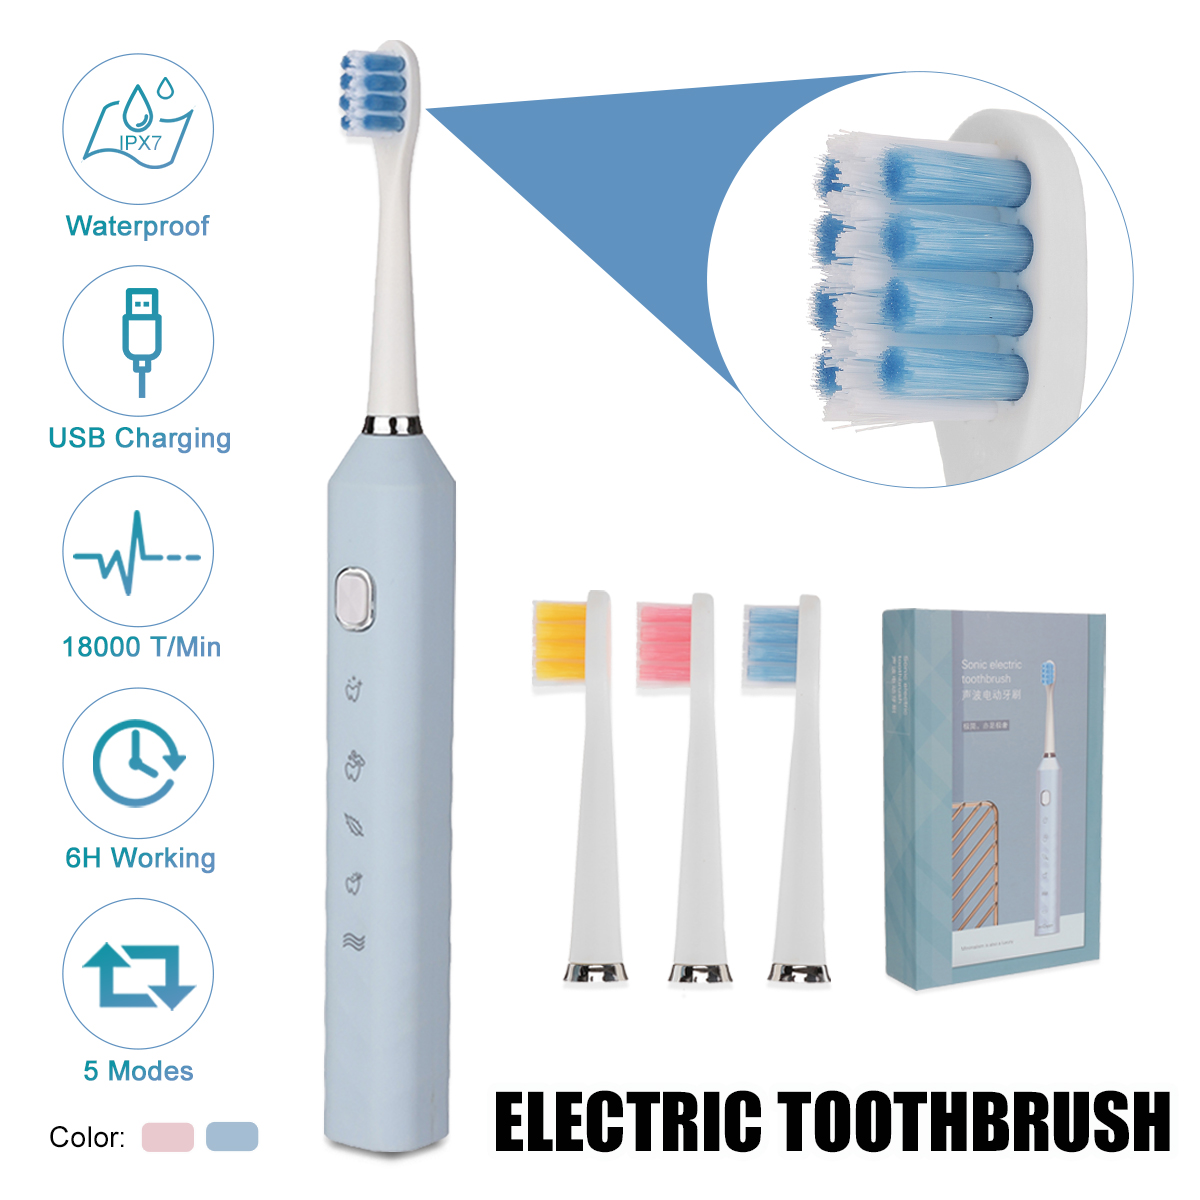 18000rpm-Electric-Toothbrush-5-Modes-Tooth-Cleaner-IPX7-Waterproof-For-Above-Over-12-Years-Old-1869980-3